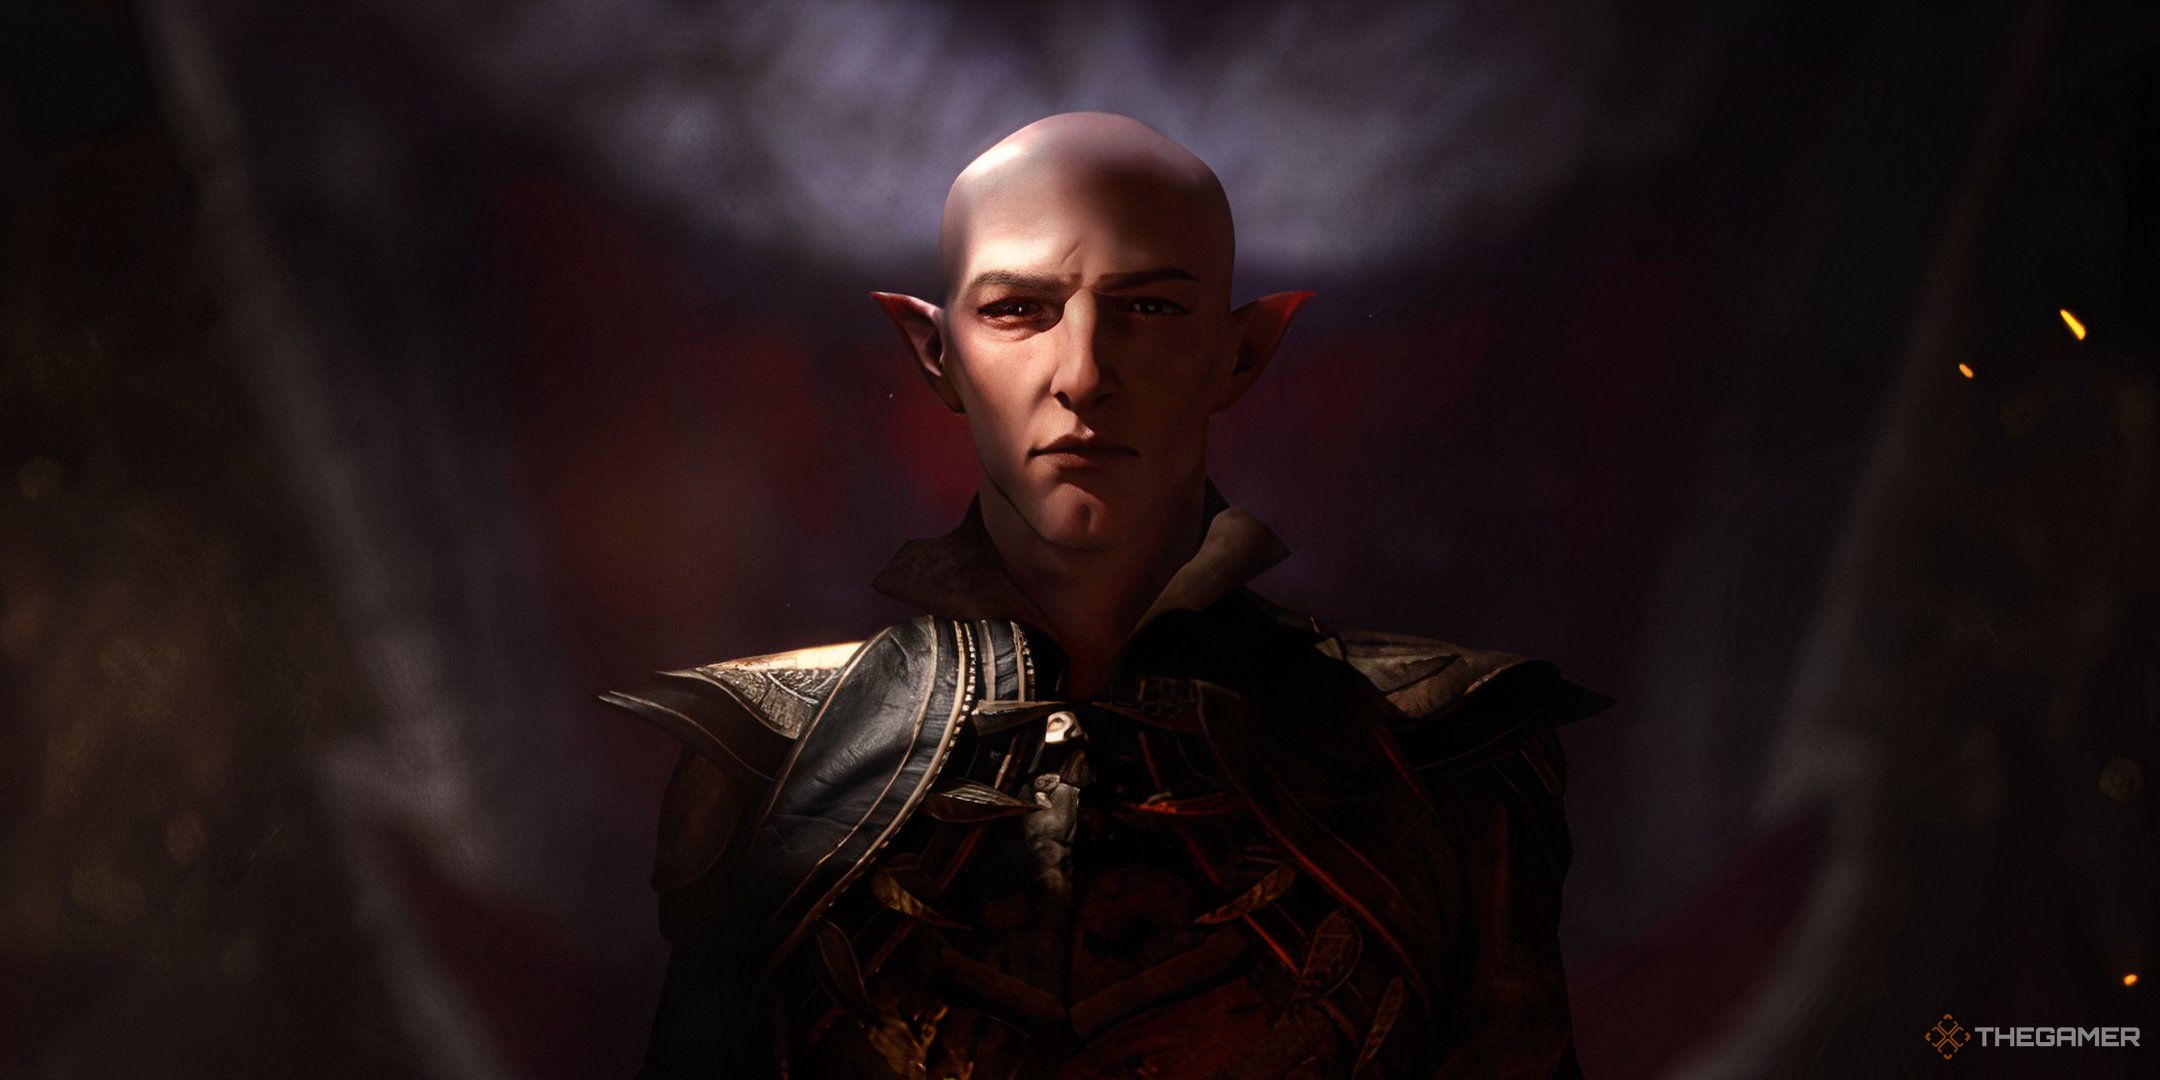 Solas in Dragon Age Dreadwolf, looking directly at the camera